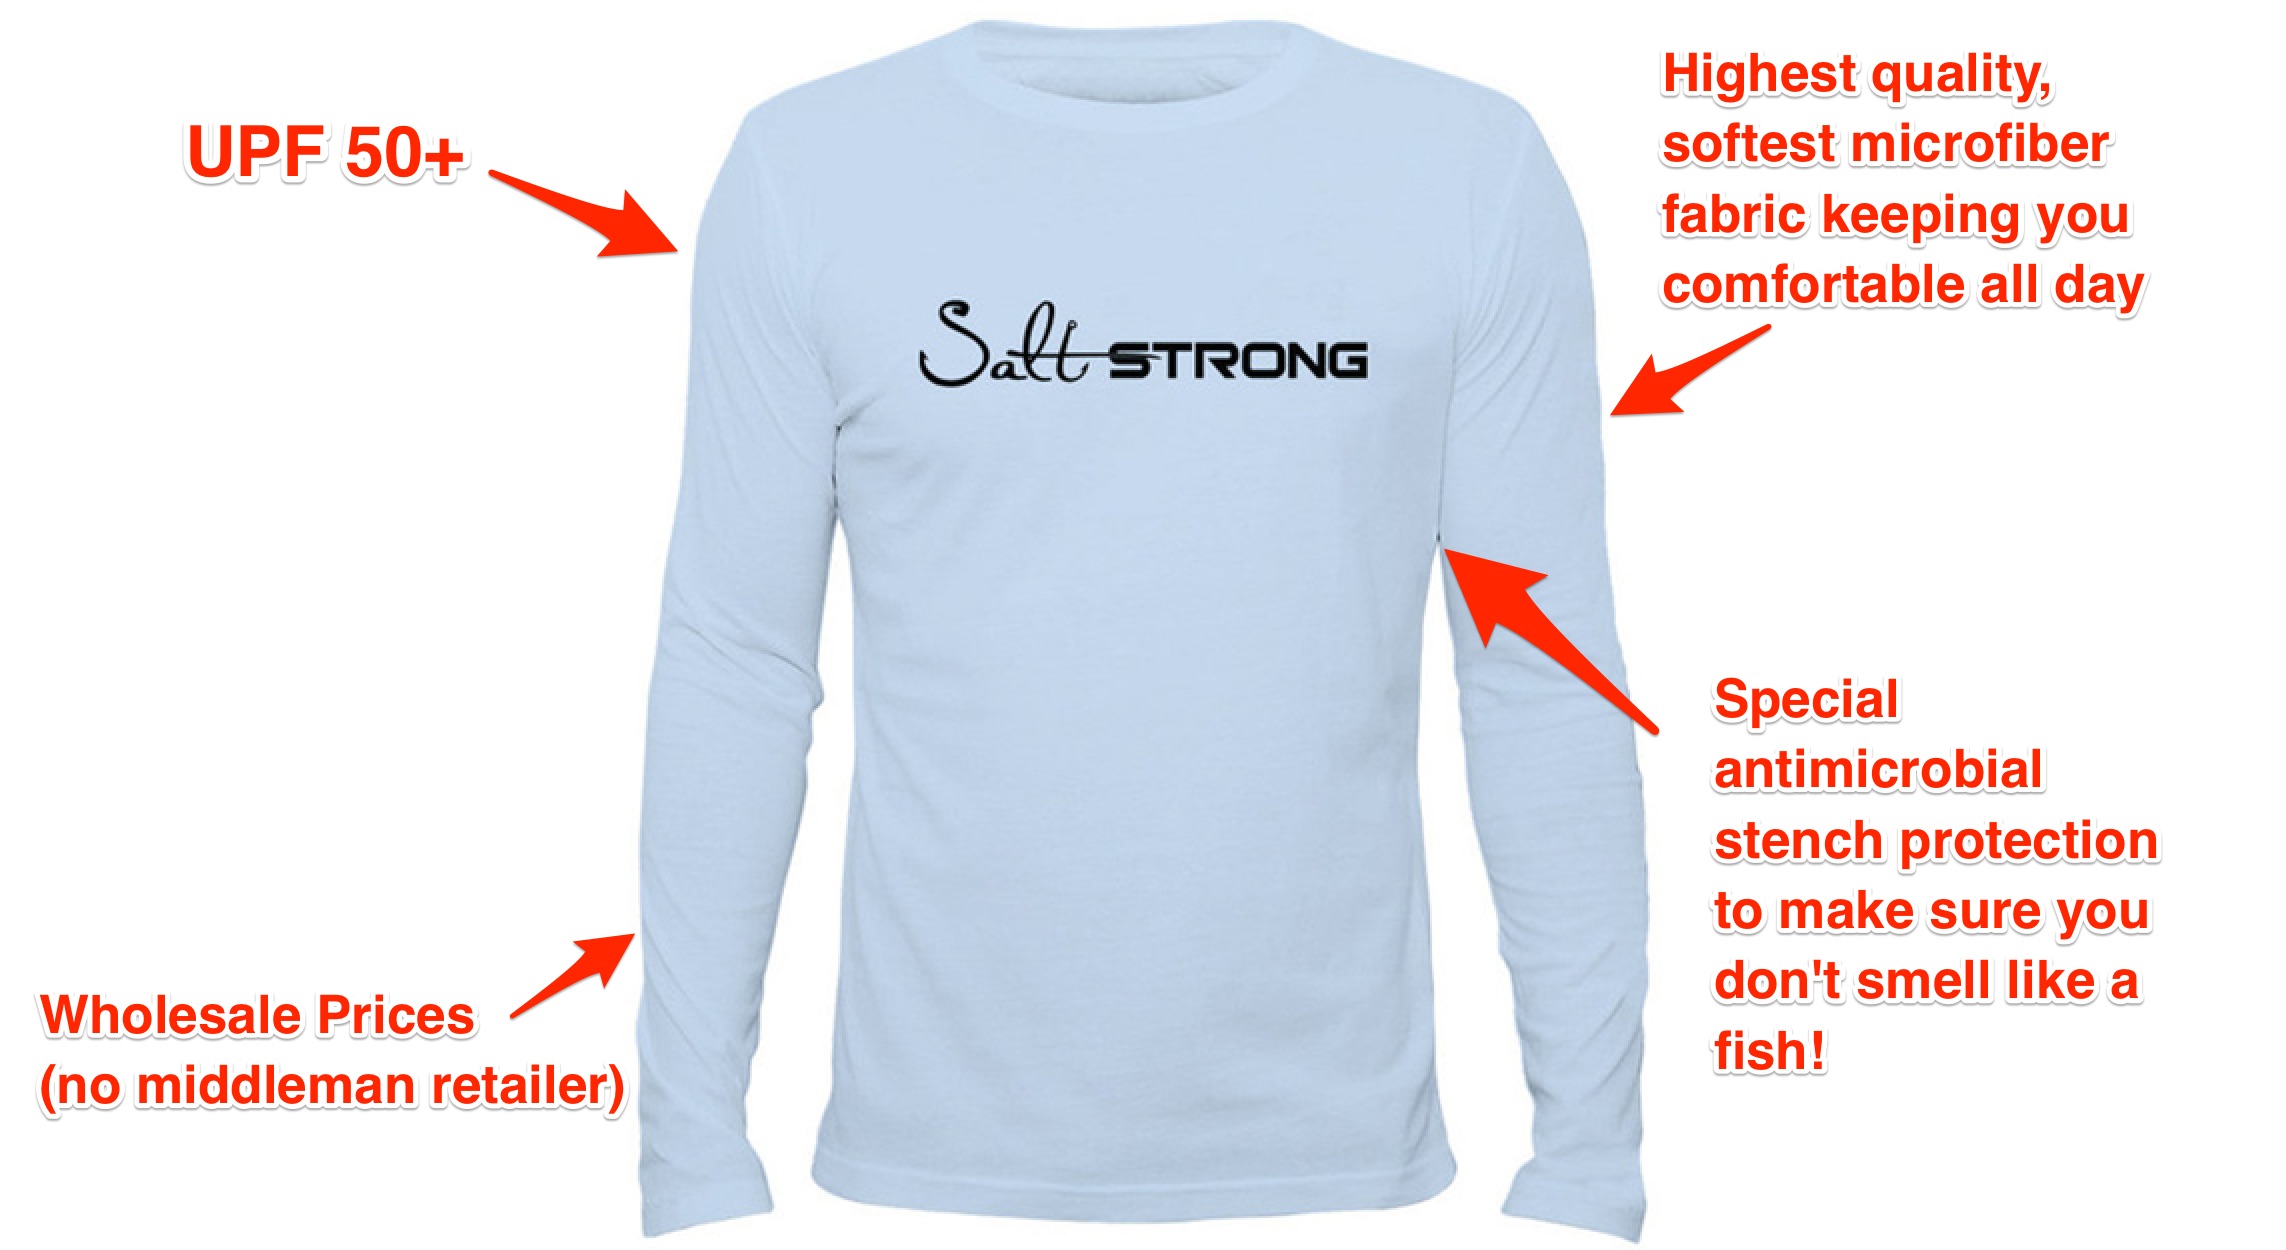 Why A Skin Cancer Survivor Uses This Sun Protection Fishing Shirt